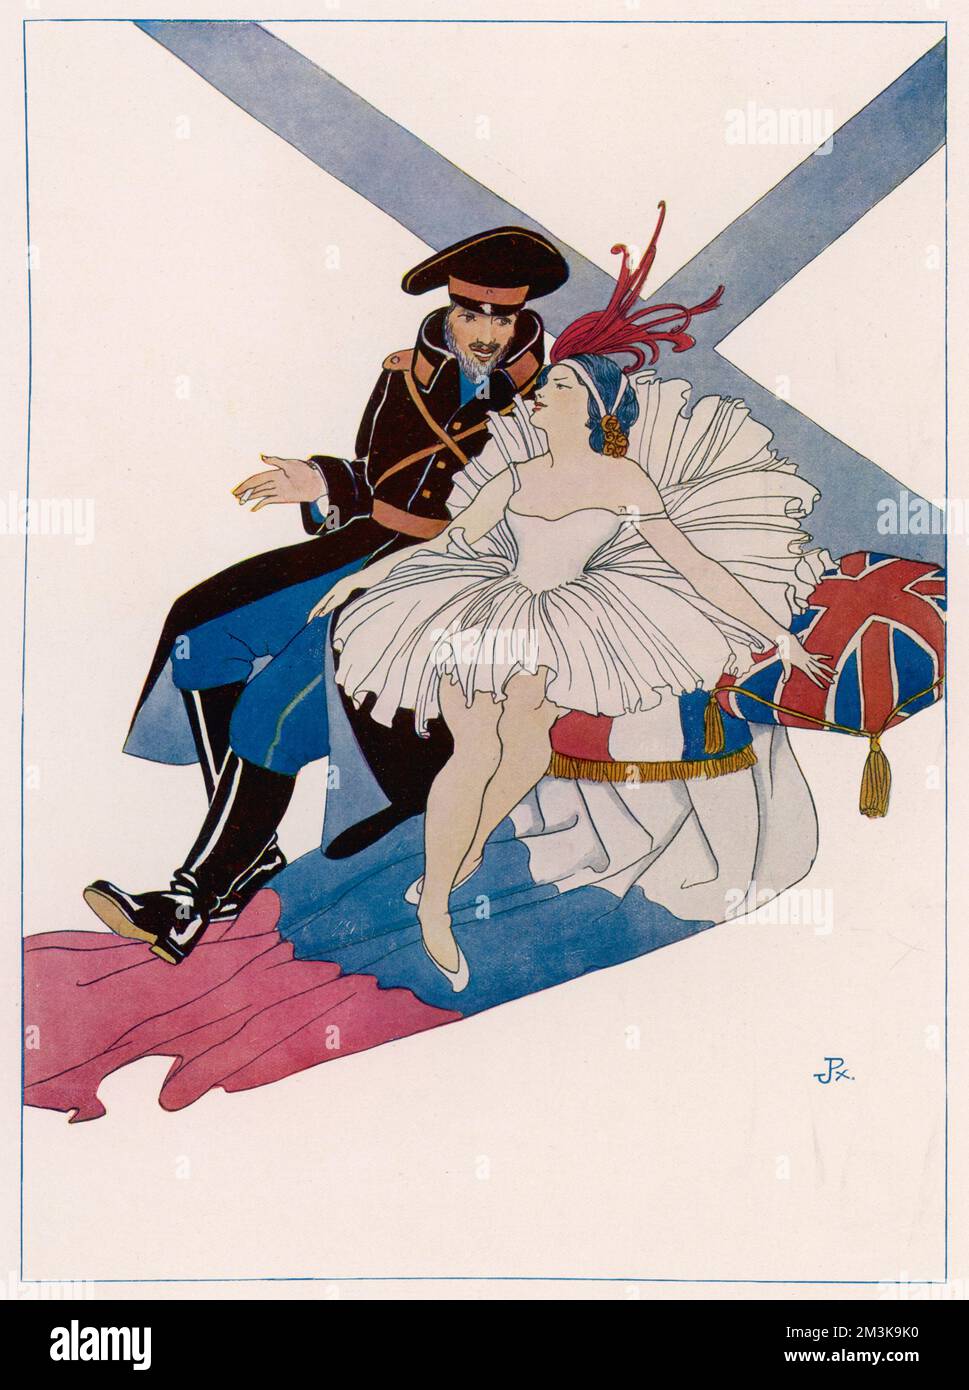 A bearded Russian soldier wearing a heavy greatcoat and shiny boots, converses with a graceful ballerina against the backdrop of his country's flag.     Date: 1914 Stock Photo